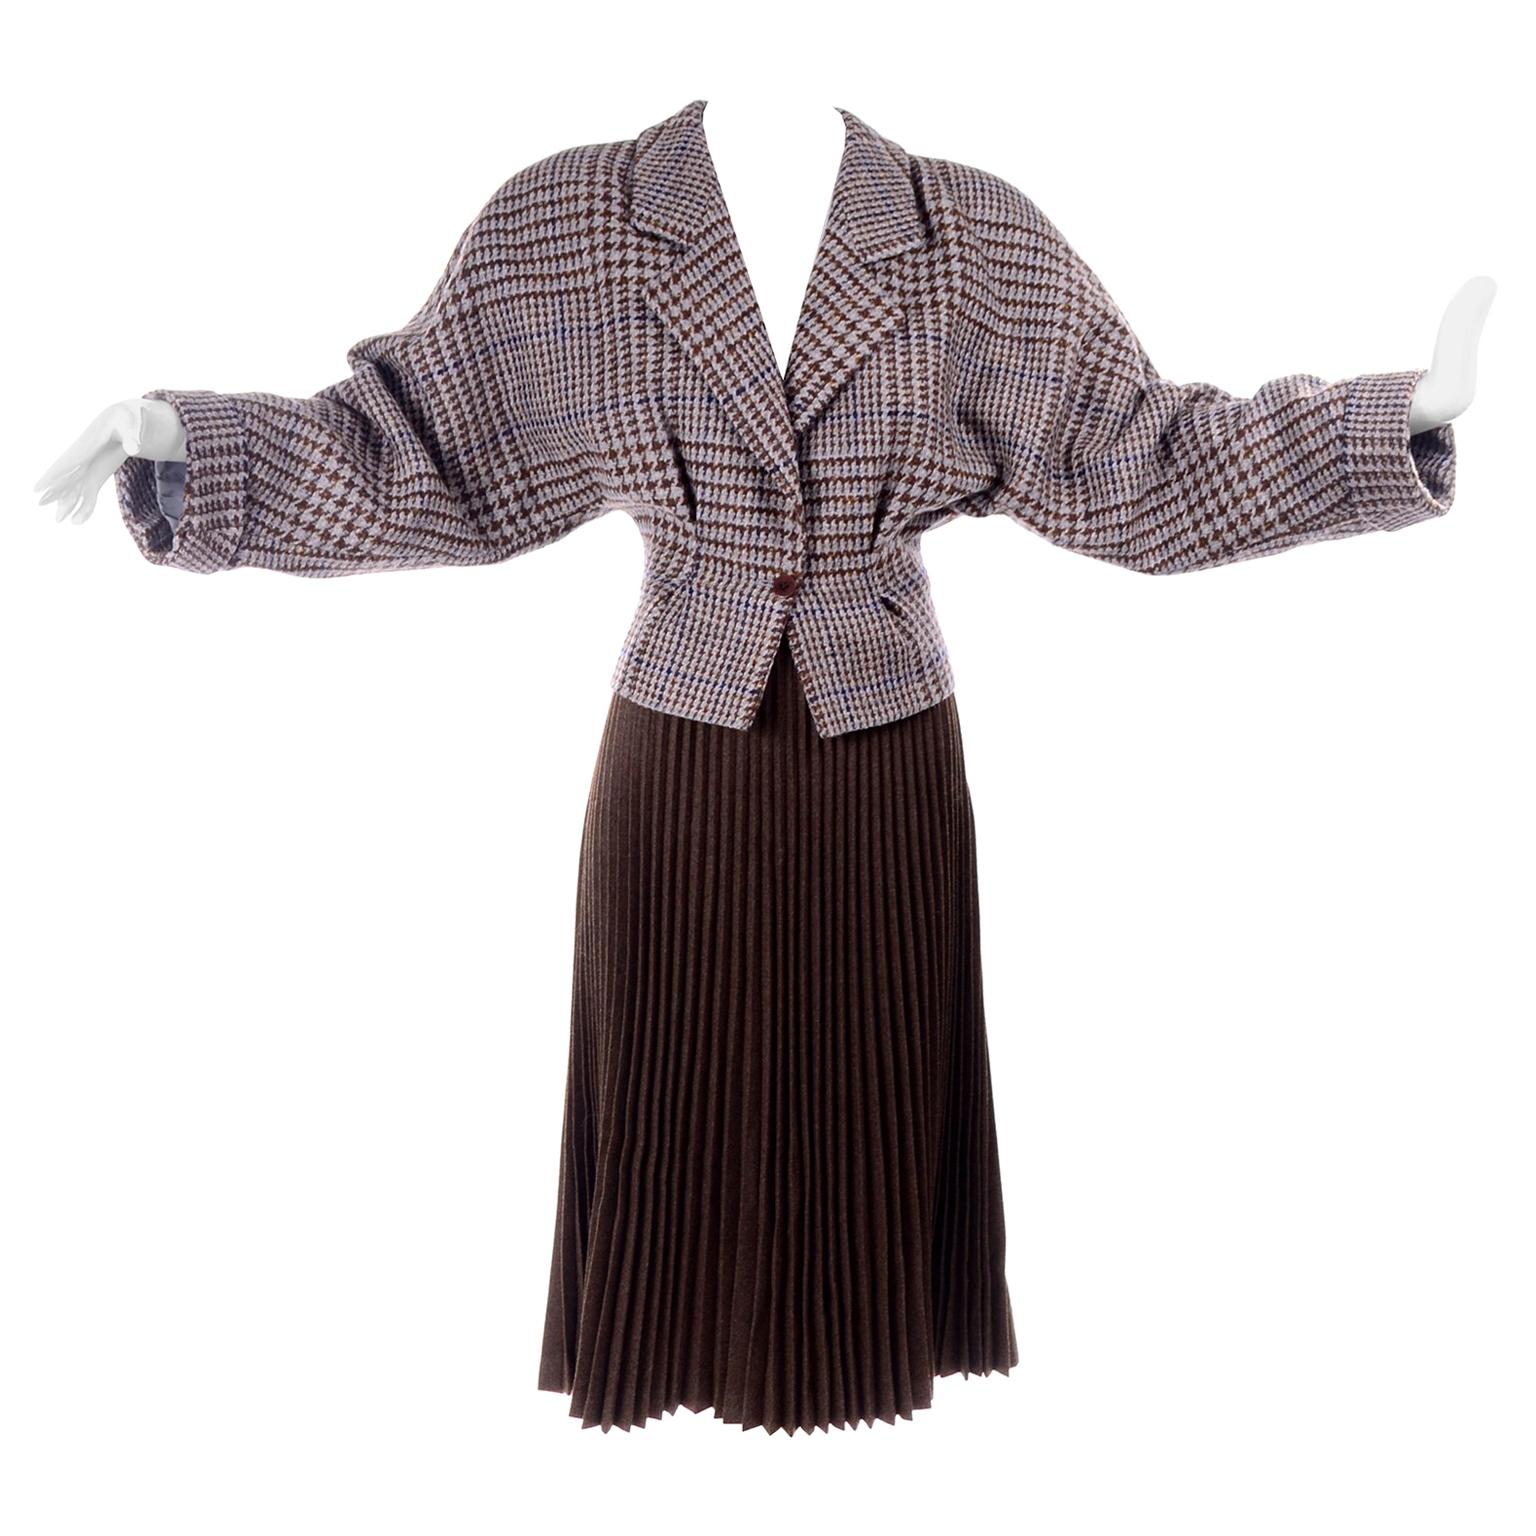 Giorgio Armani 1980s Cropped Houndstooth Jacket W Pleated Brown Wool Skirt Suit